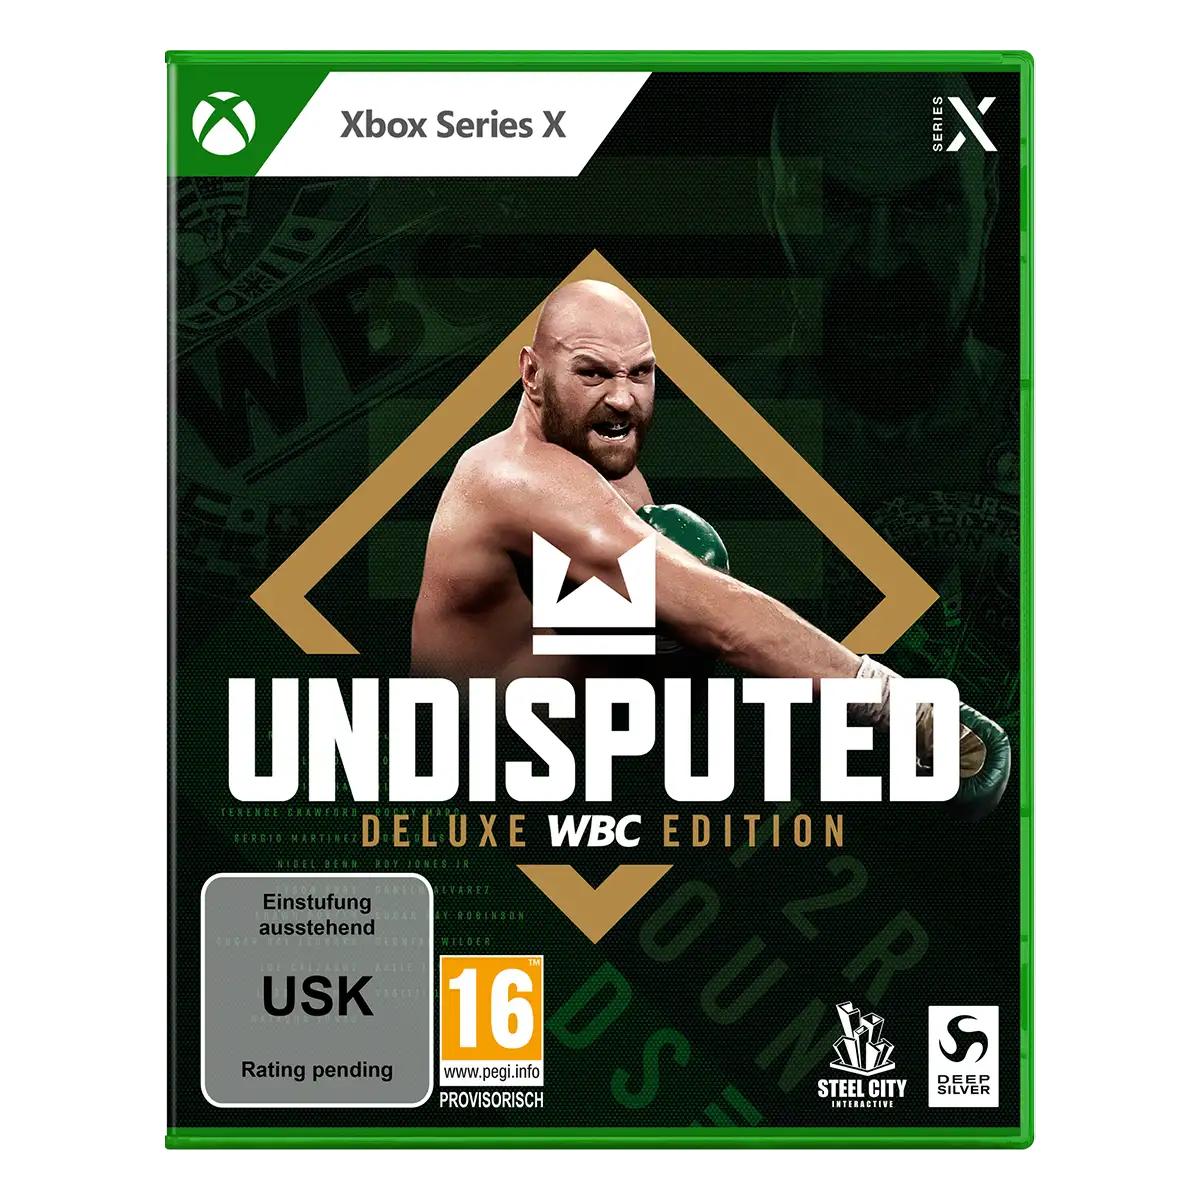 Undisputed Deluxe WBC Edition (XSRX) Image 2